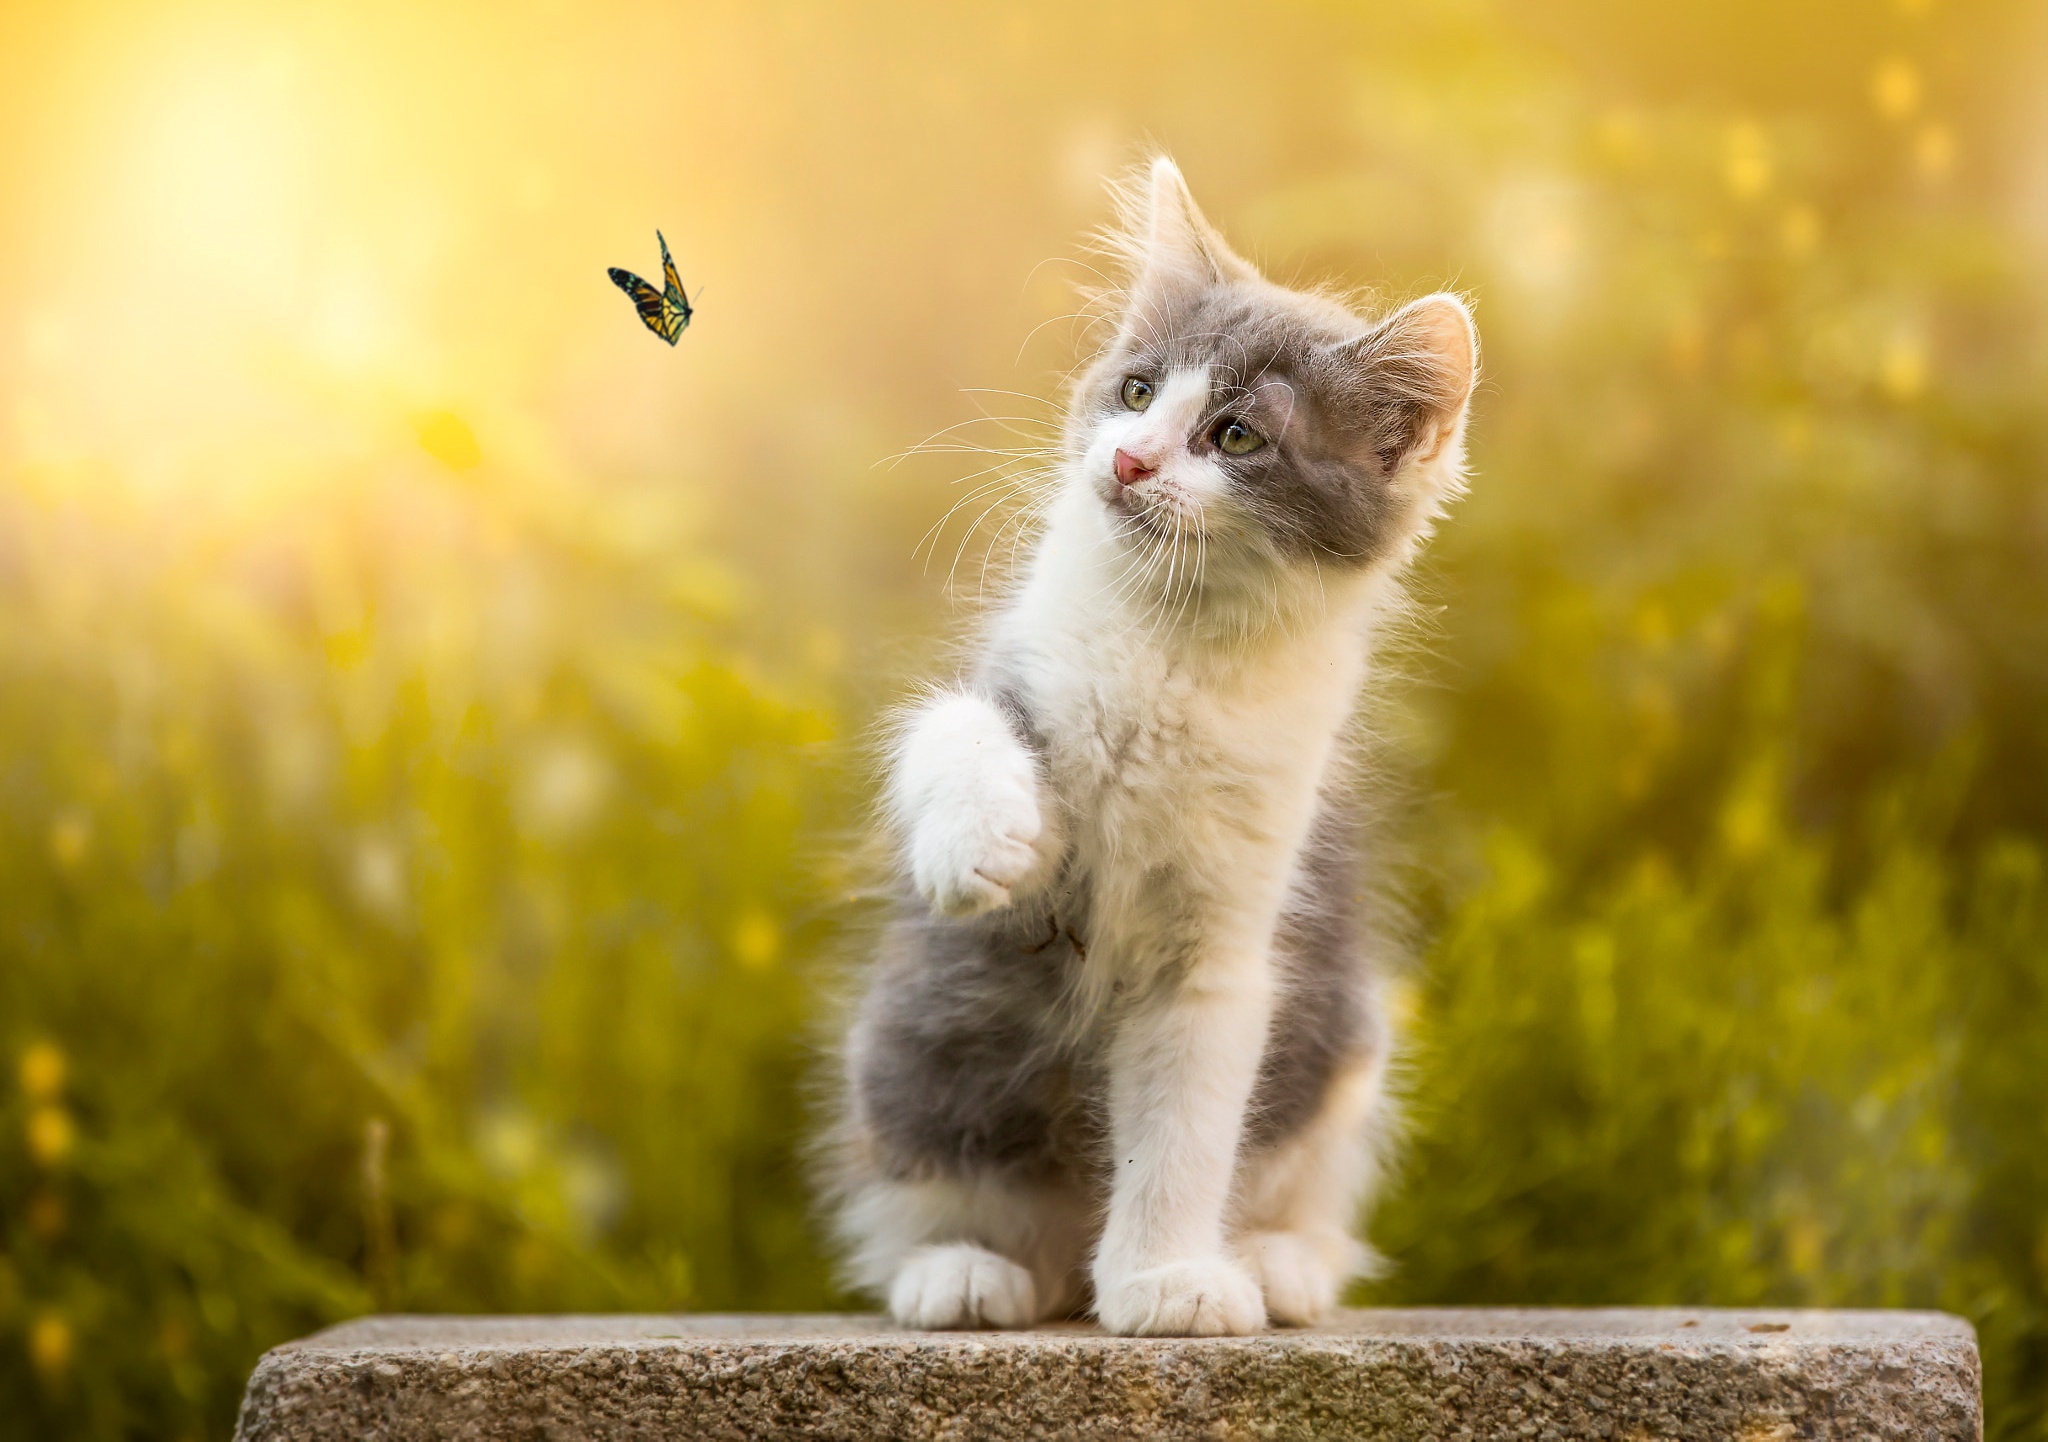 #nature, #cat, #insect, #animals, #butterfly, wallpaper. Mocah HD Wallpaper